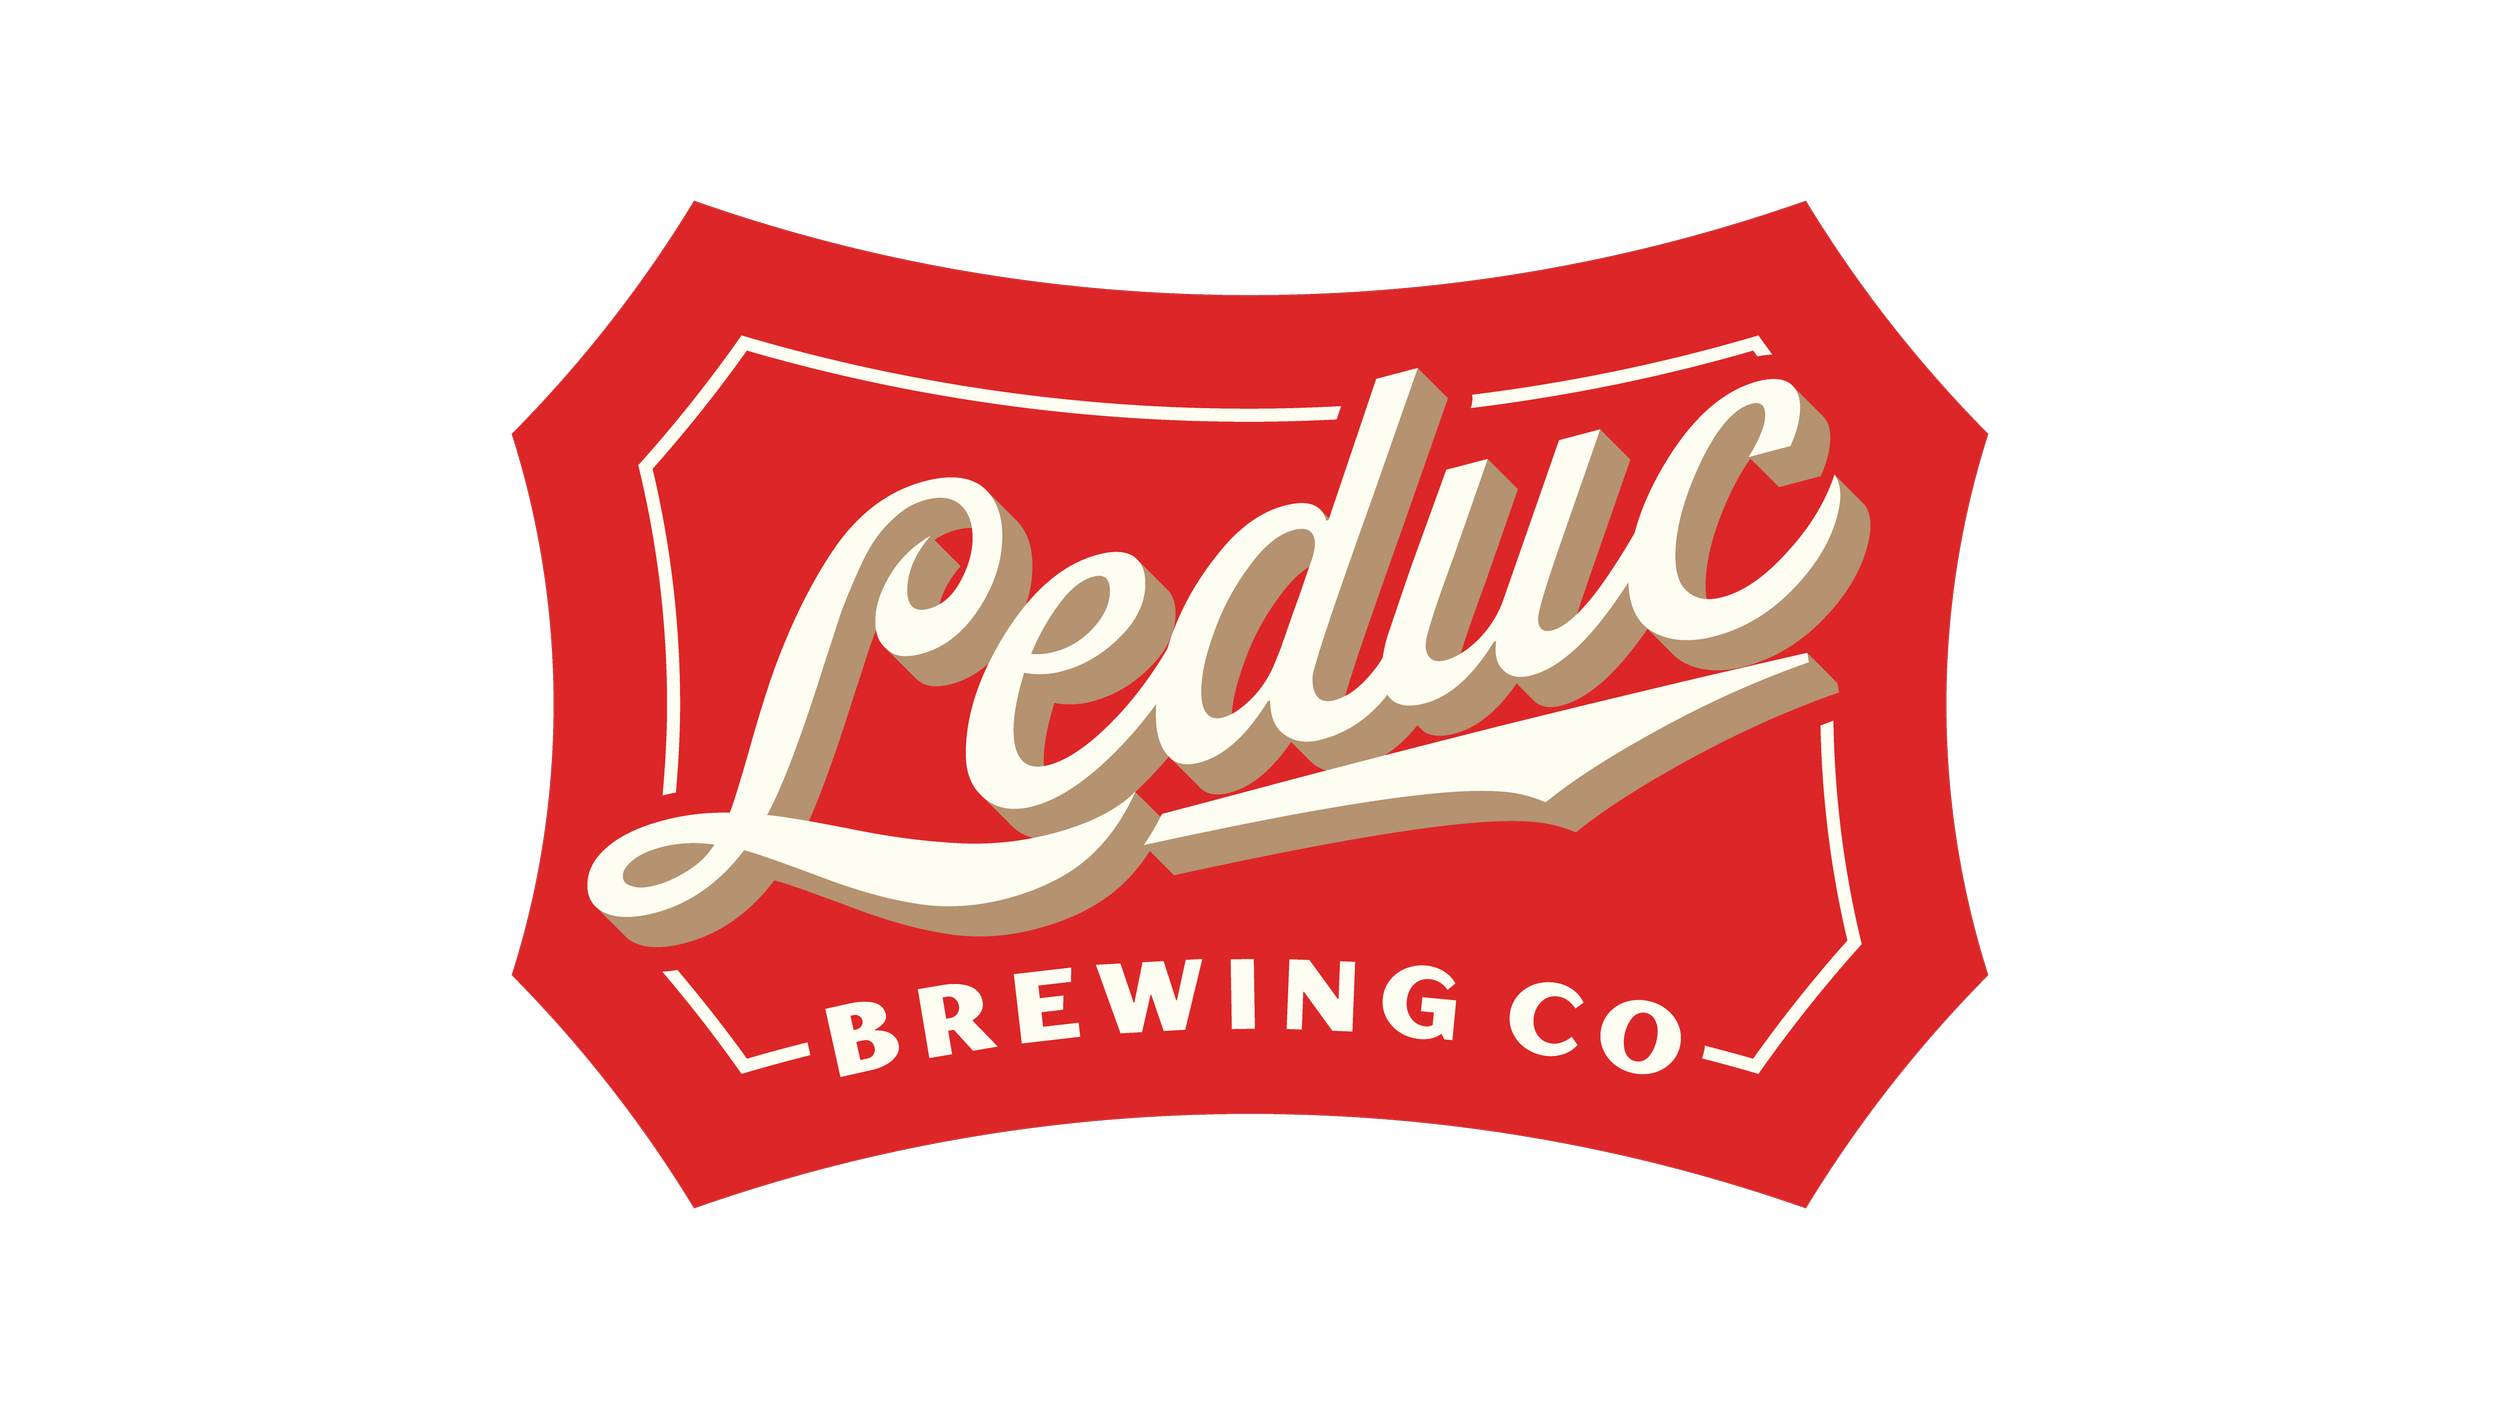 leducbrewing.png